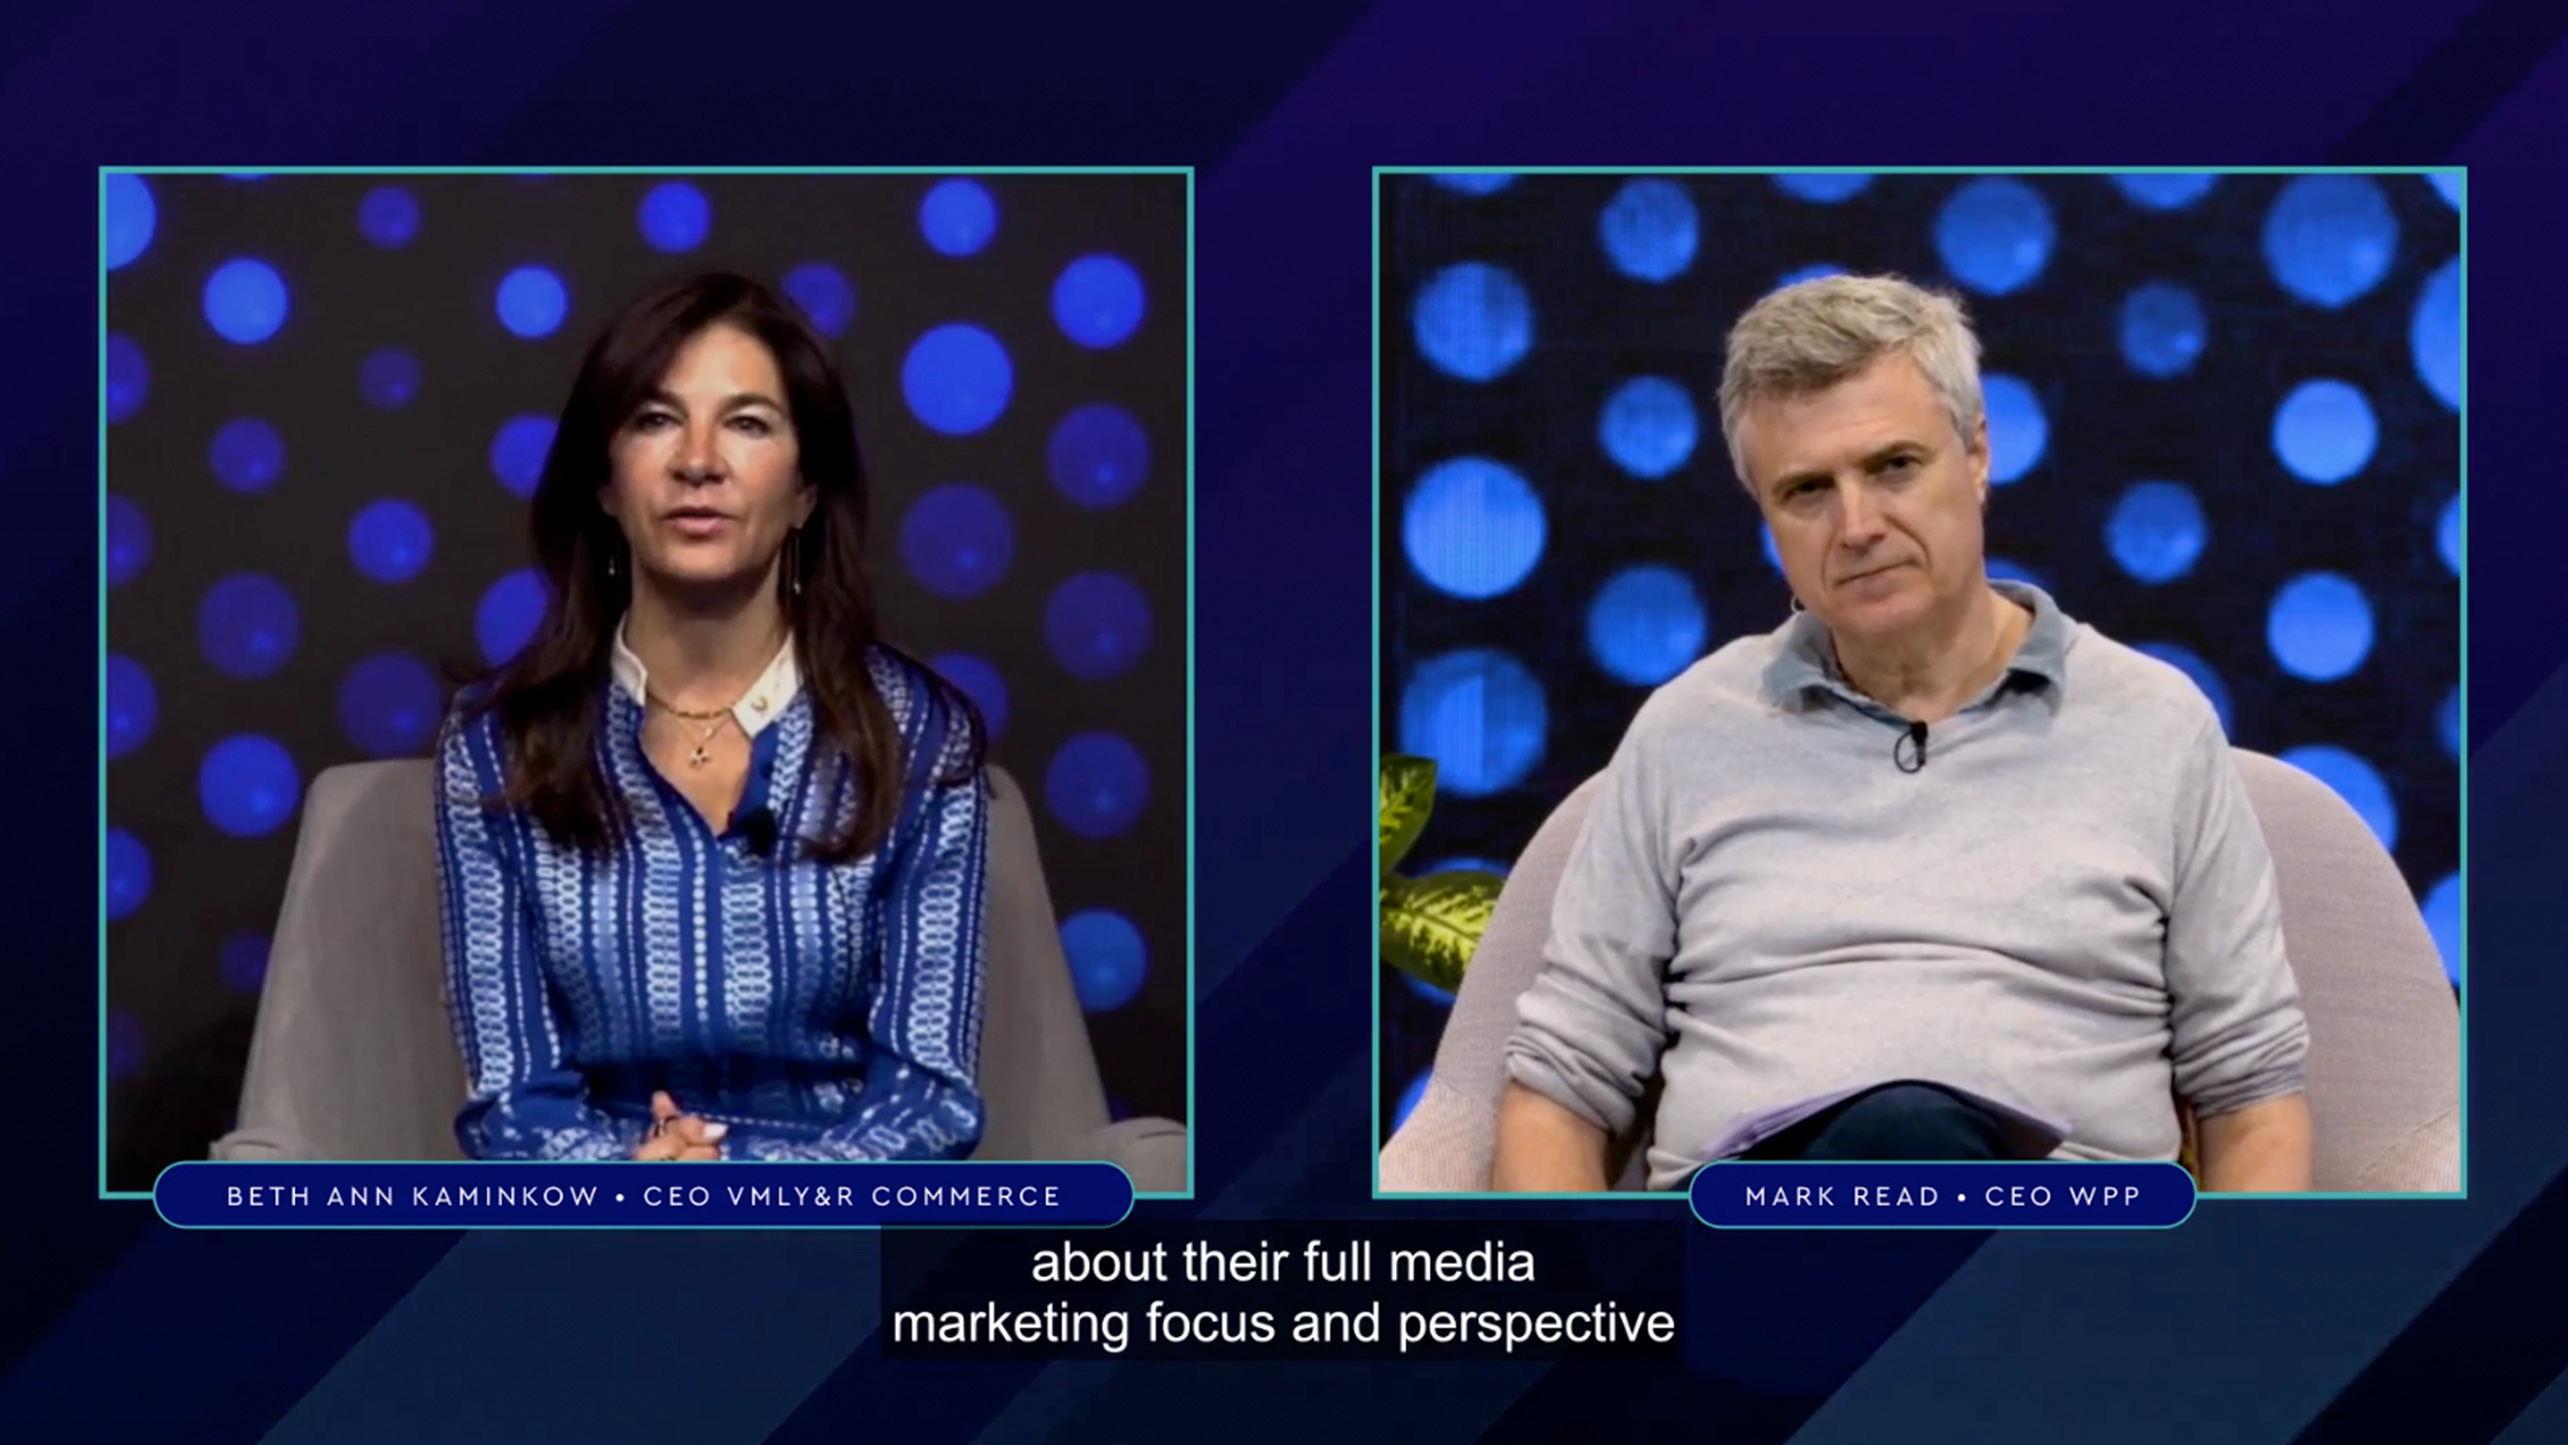 Mark Read, CEO, WPP in conversation with Beth Ann Kaminkow, CEO, VMLY&R Commerce